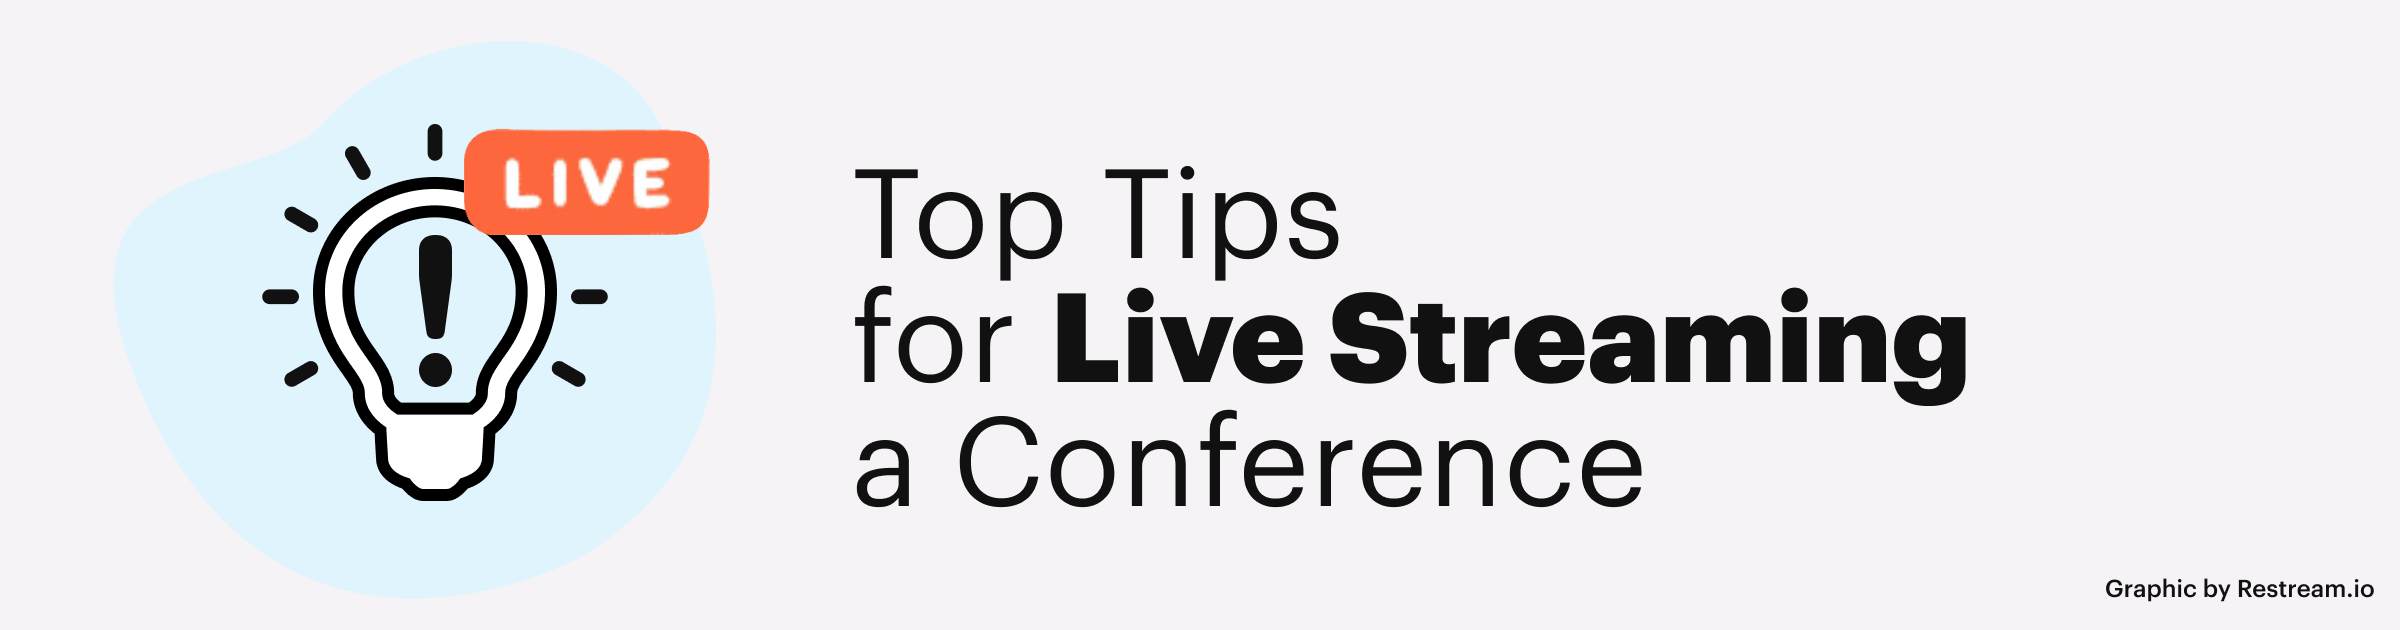 Top tips for live streaming a conference